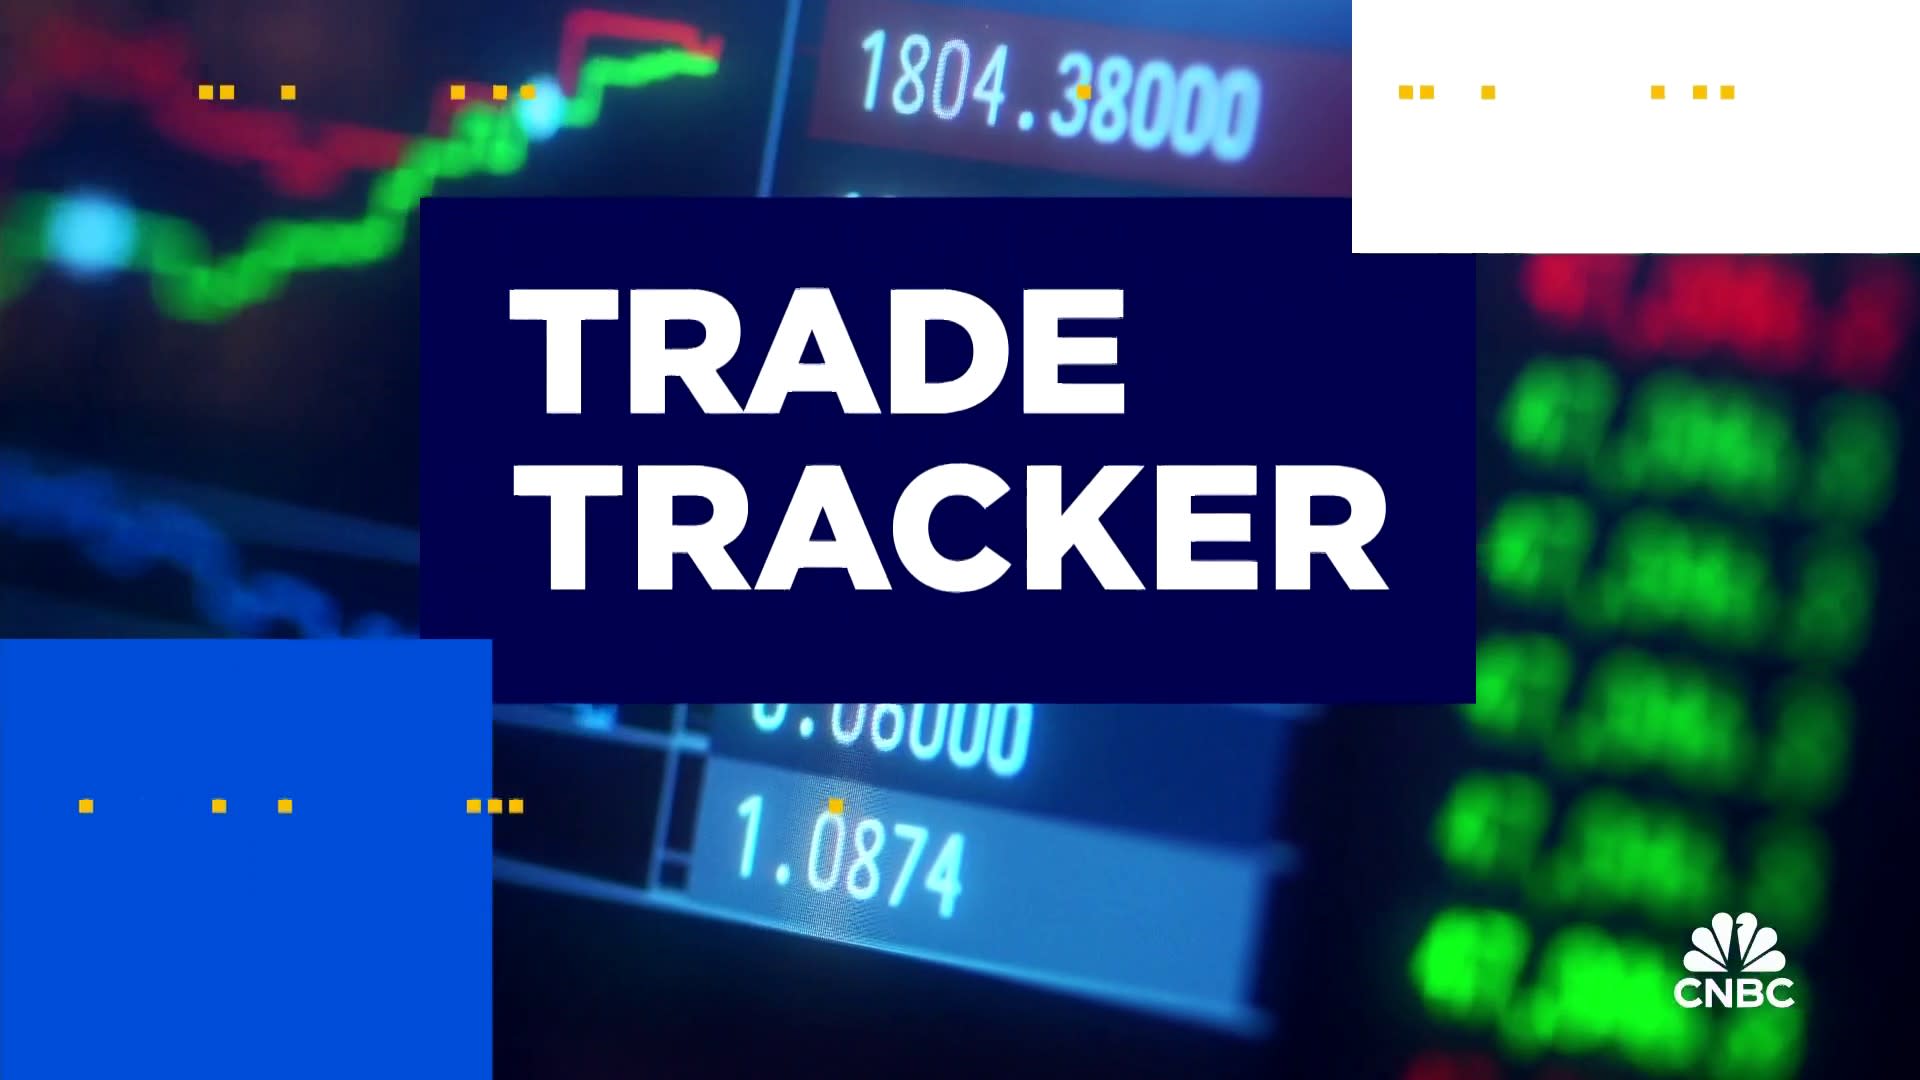 Trade Tracker: Jim Lebenthal buys more Oracle and Bill Baruch buys some SPY put spreads and sells AMD